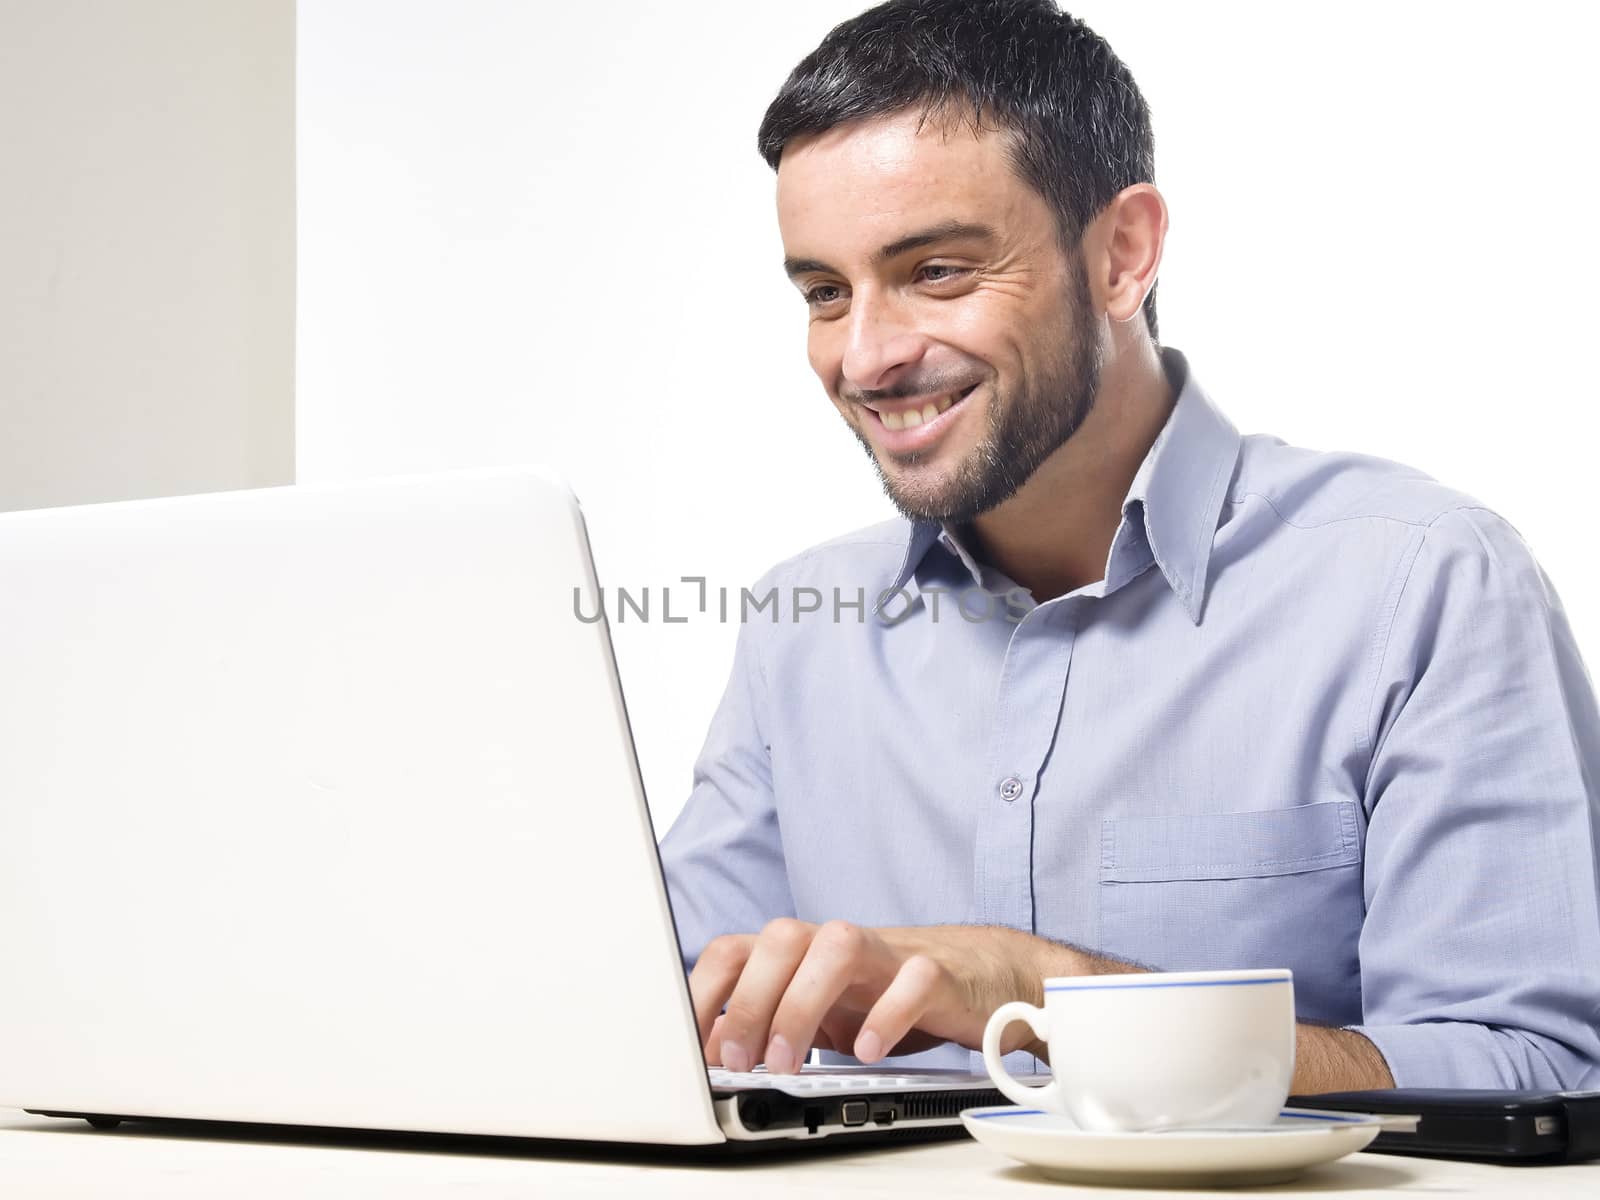 Young Man with Beard working on Laptop by ocusfocus